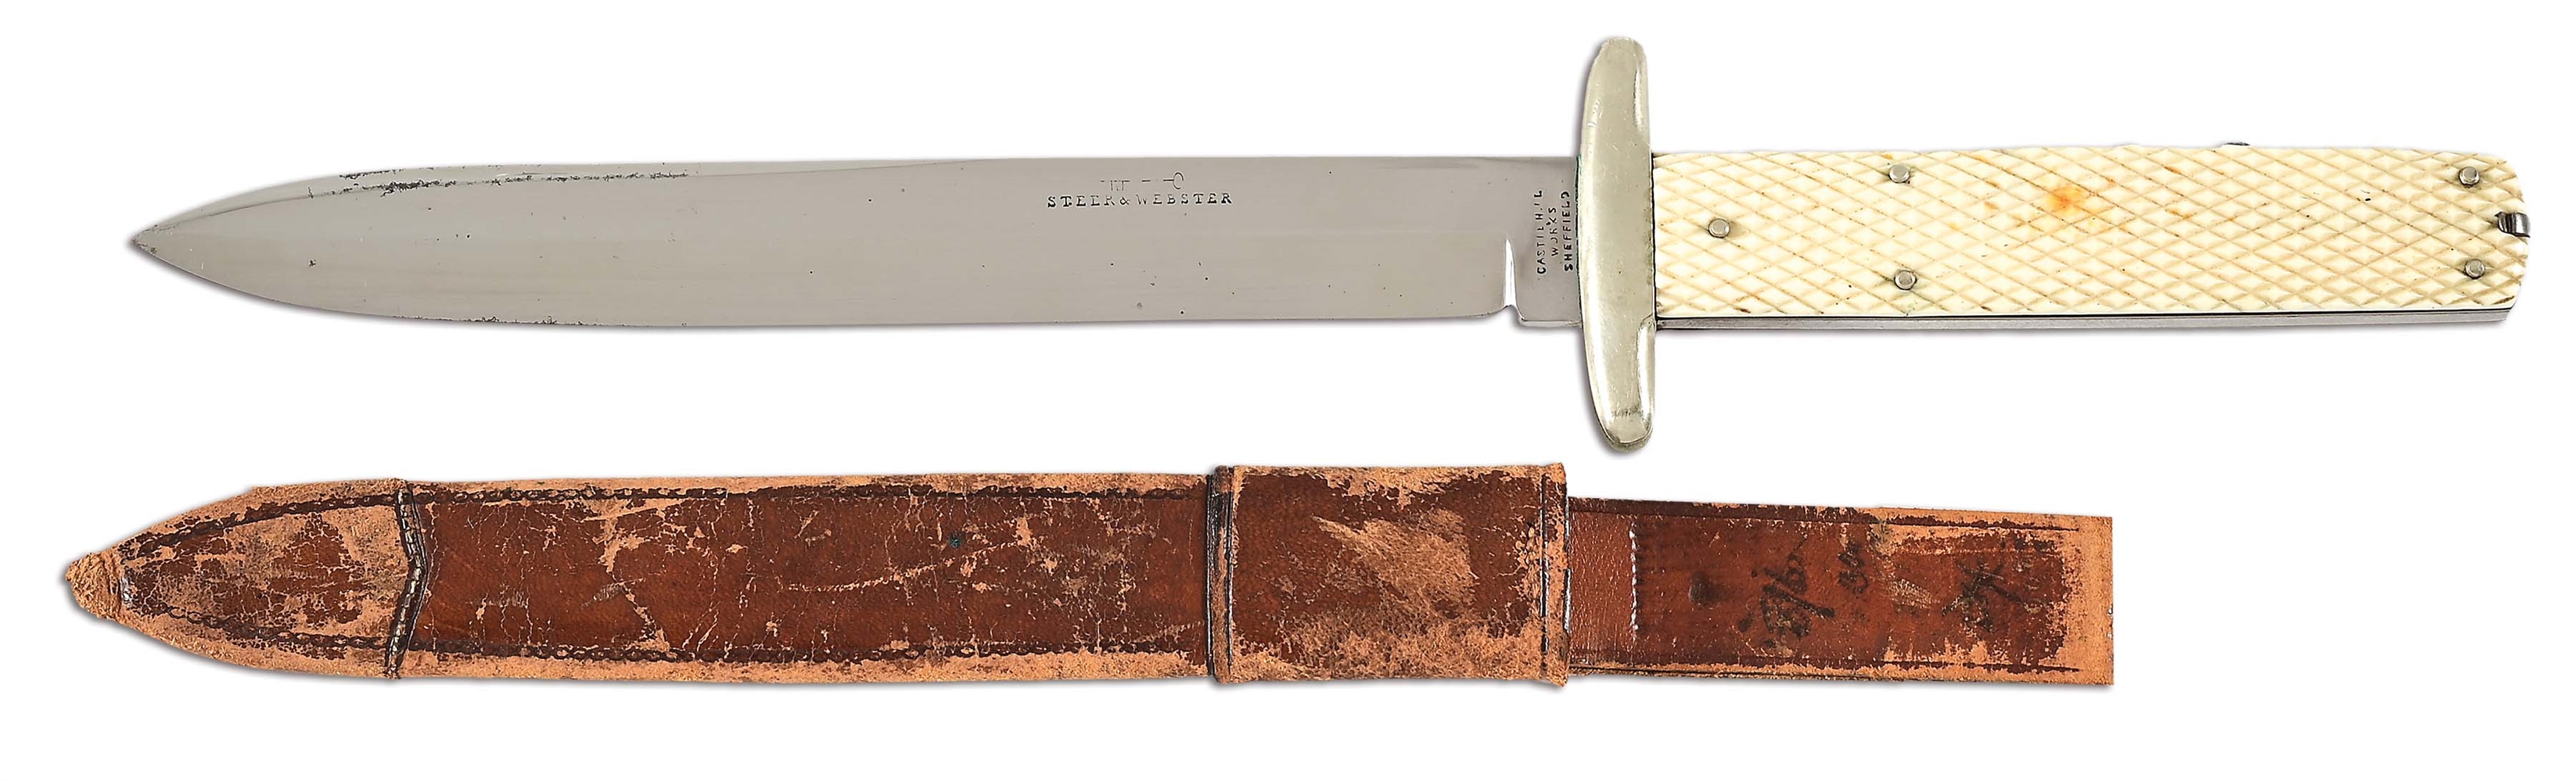 COMBINATION BOWIE KNIFE BY STEER & WEBSTER, SHEFFIELD.